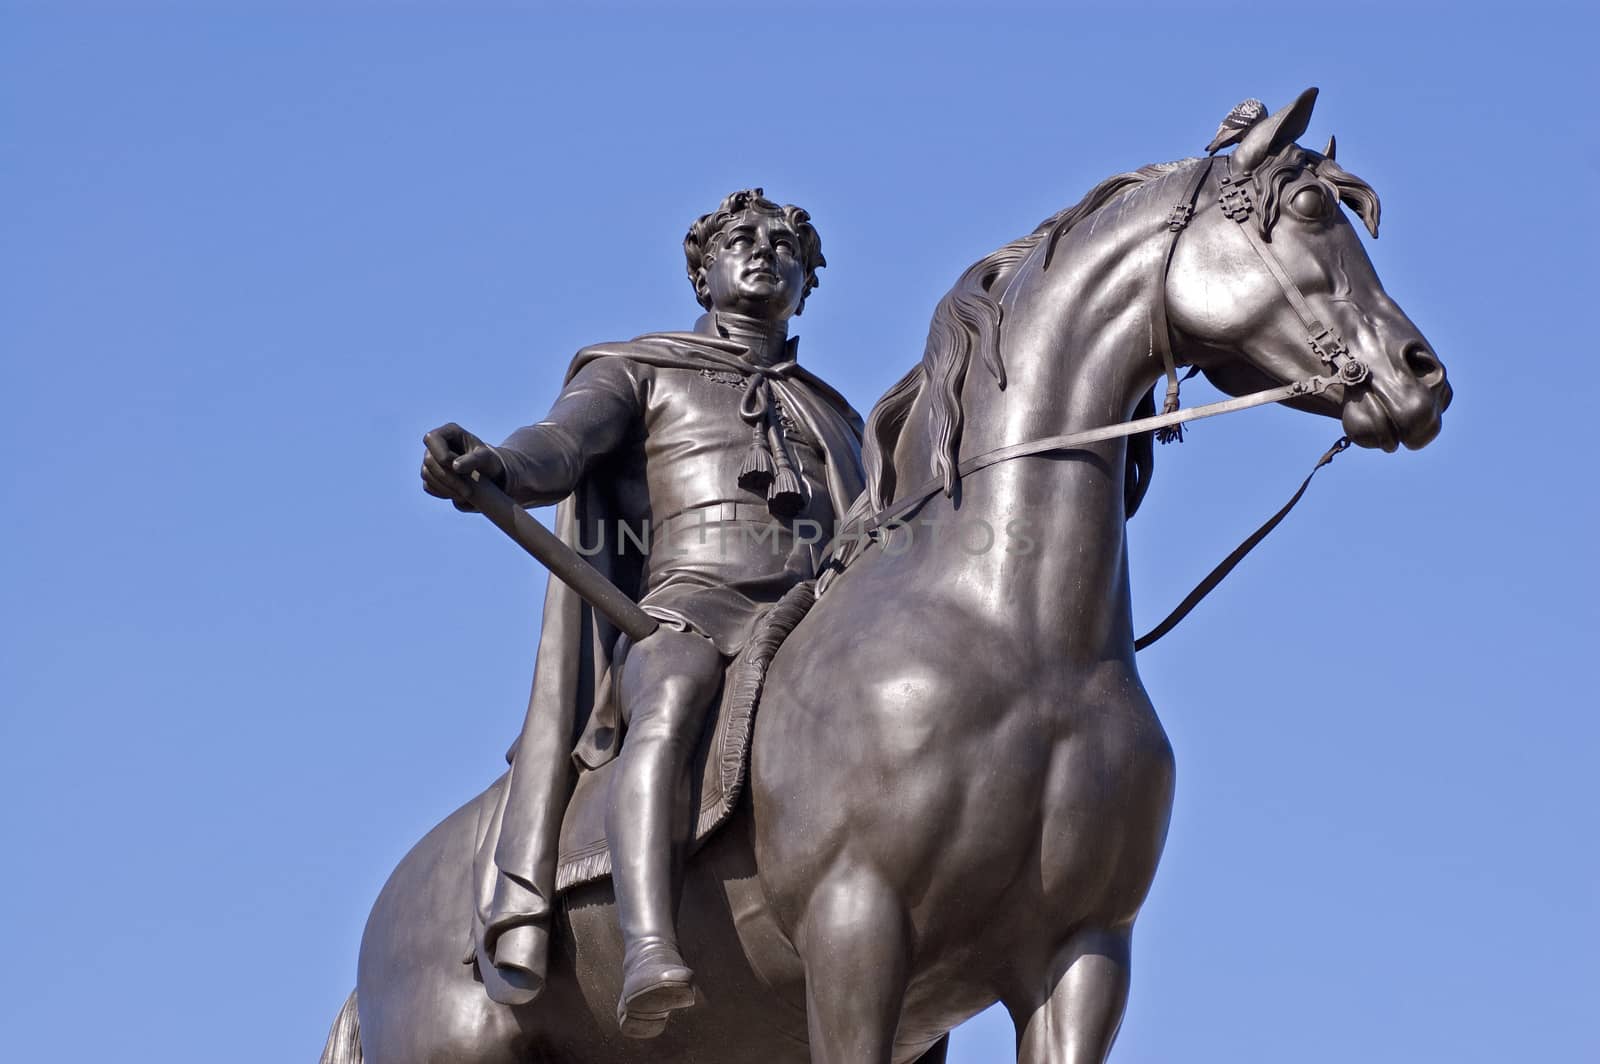 Statue in Trafalgar Square, London of King George IV (1762-1830). George the Fourth was King of England, Scotland and Ireland for ten years before his death.